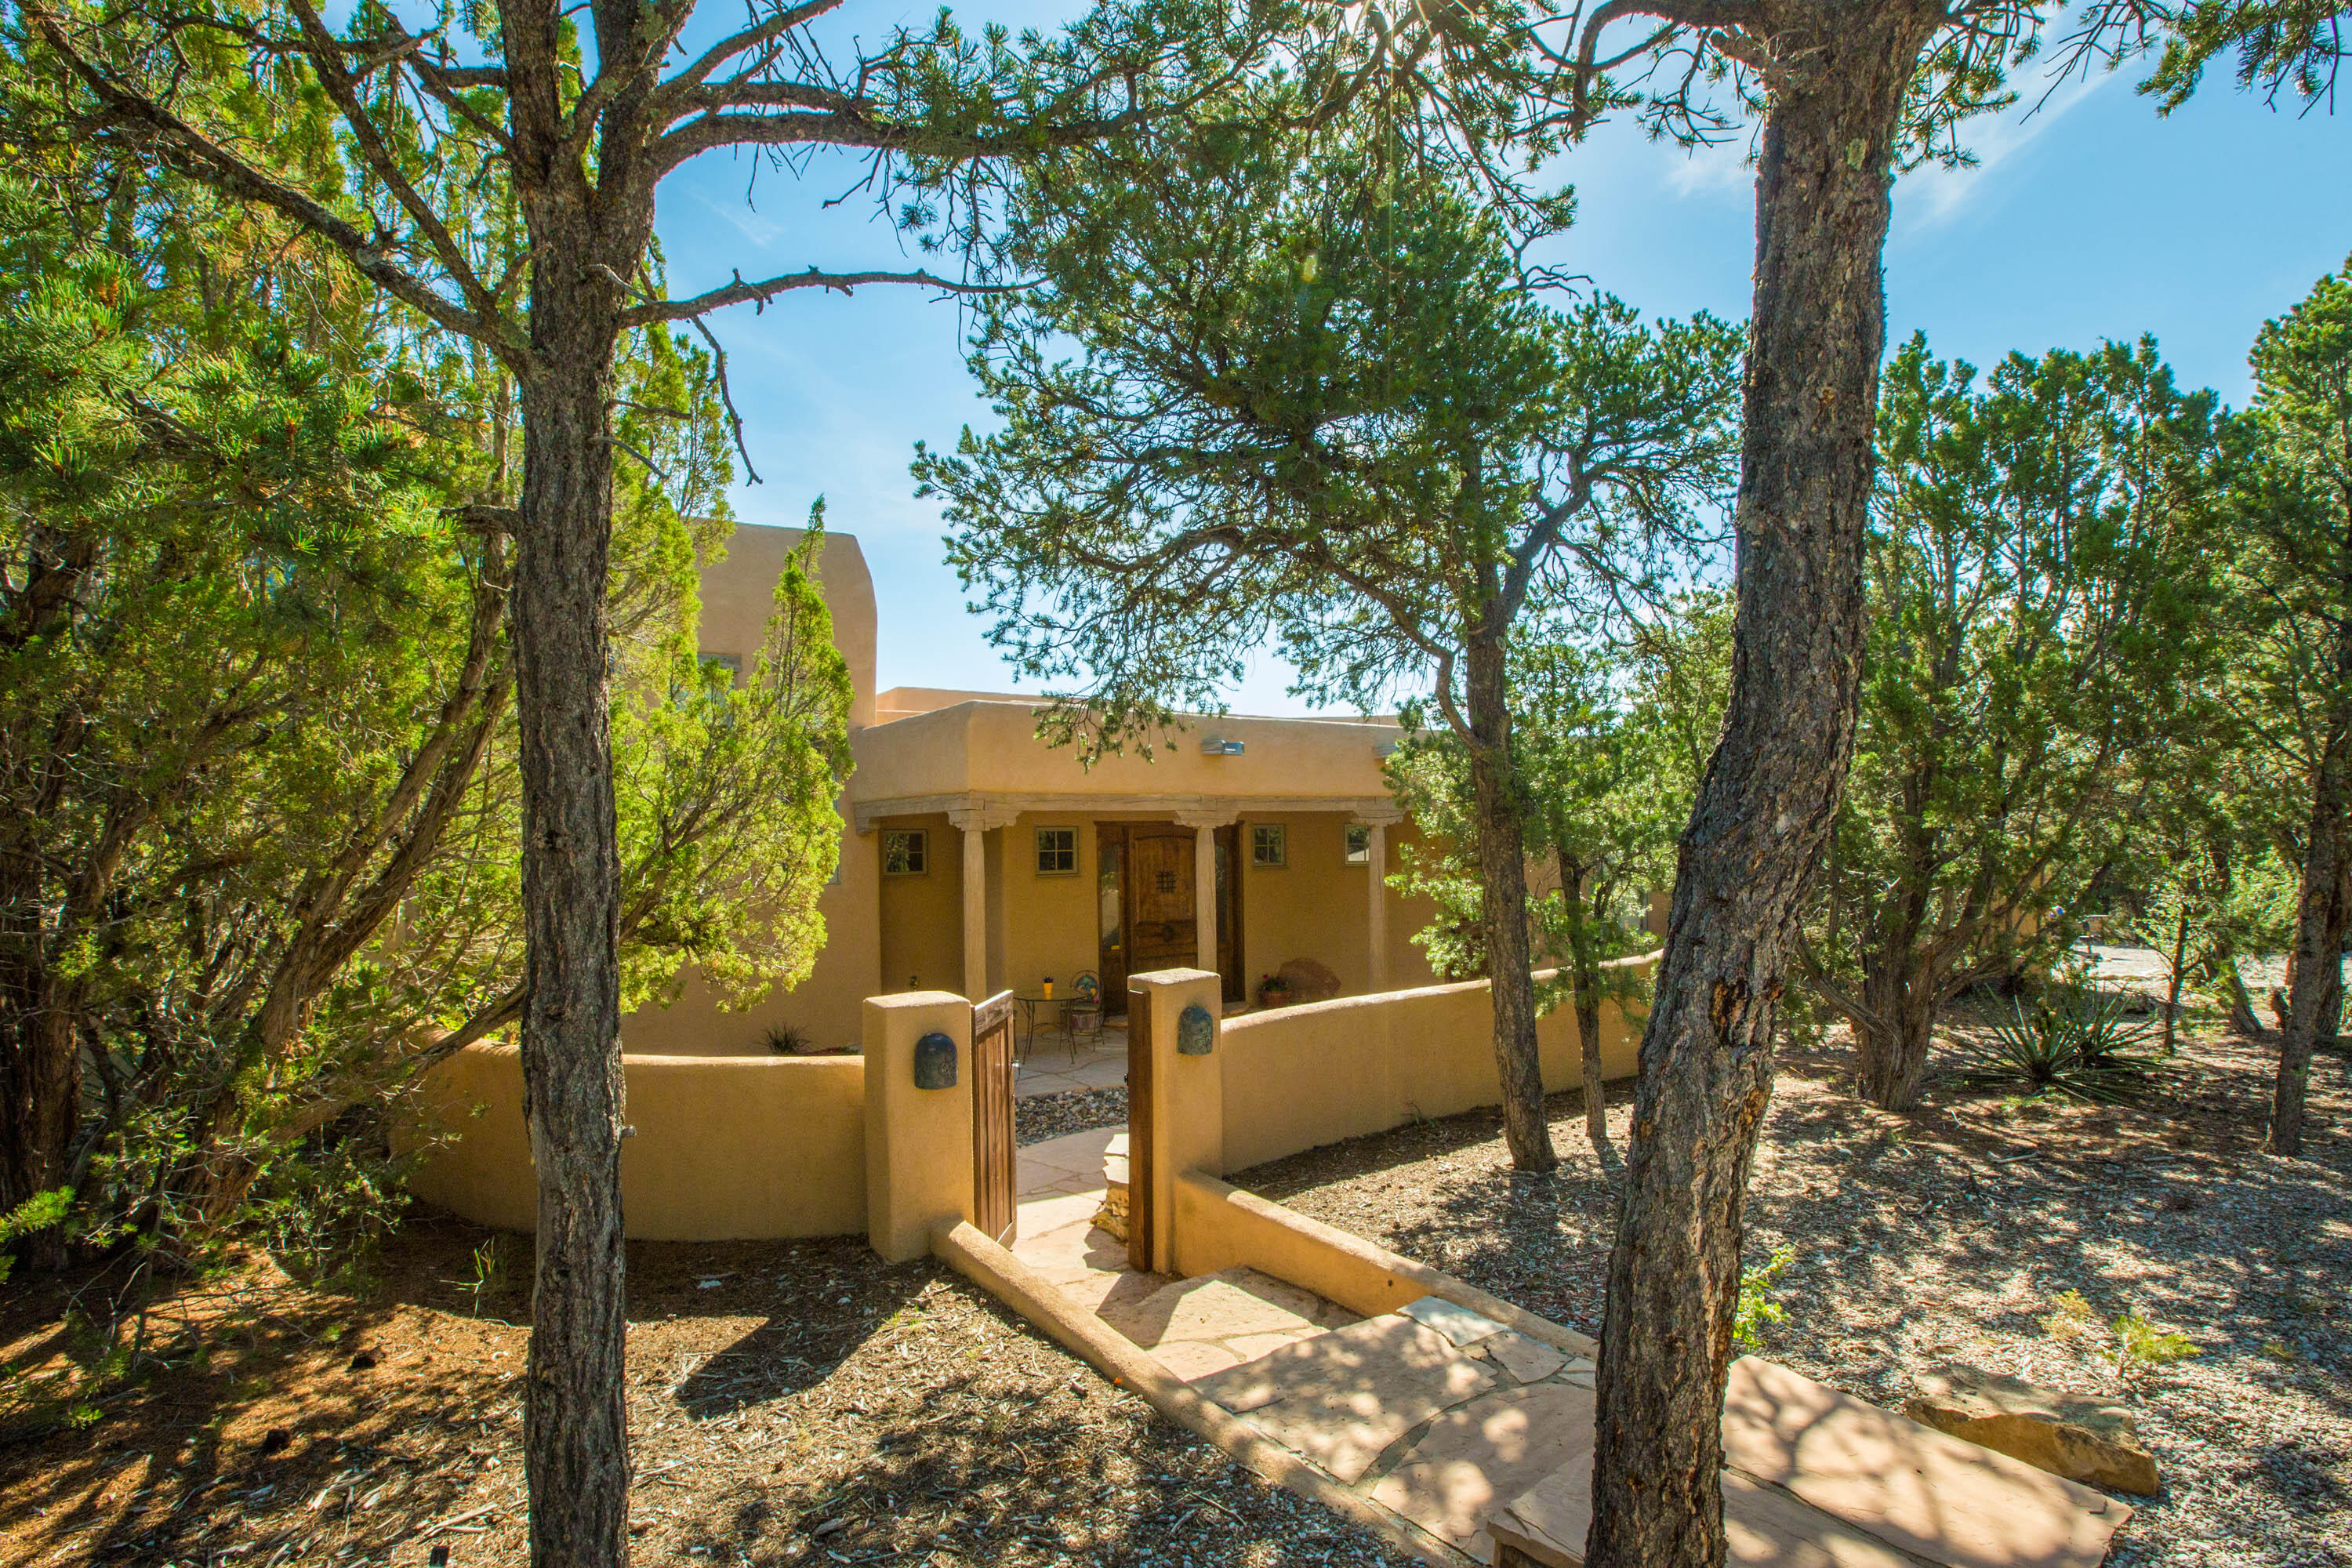 This beautiful custom home provides seclusion among the trees on a generous 3.08 acre lot. The fenced entry courtyard is the perfect entry into this open concept southwest style home. Solid wood Santa Fe doors, beamed ceilings and a kiva fireplace in the great room open to an immaculate kitchen perfect for entertaining. With an abundance of cabinetry, large pantry, granite counter tops, double oven with a warming drawer, gas cooktop and an additional prep sink, this kitchen checks all the boxes - not to mention the views to patio and backyard it provides. The formal dining area has its own built in buffet with extra storage and domed ceiling. The owner's suite boasts vigas and gas log kiva fireplace. Theattached bath has his and hers sinks, walk-in shower with rainfall shower head and